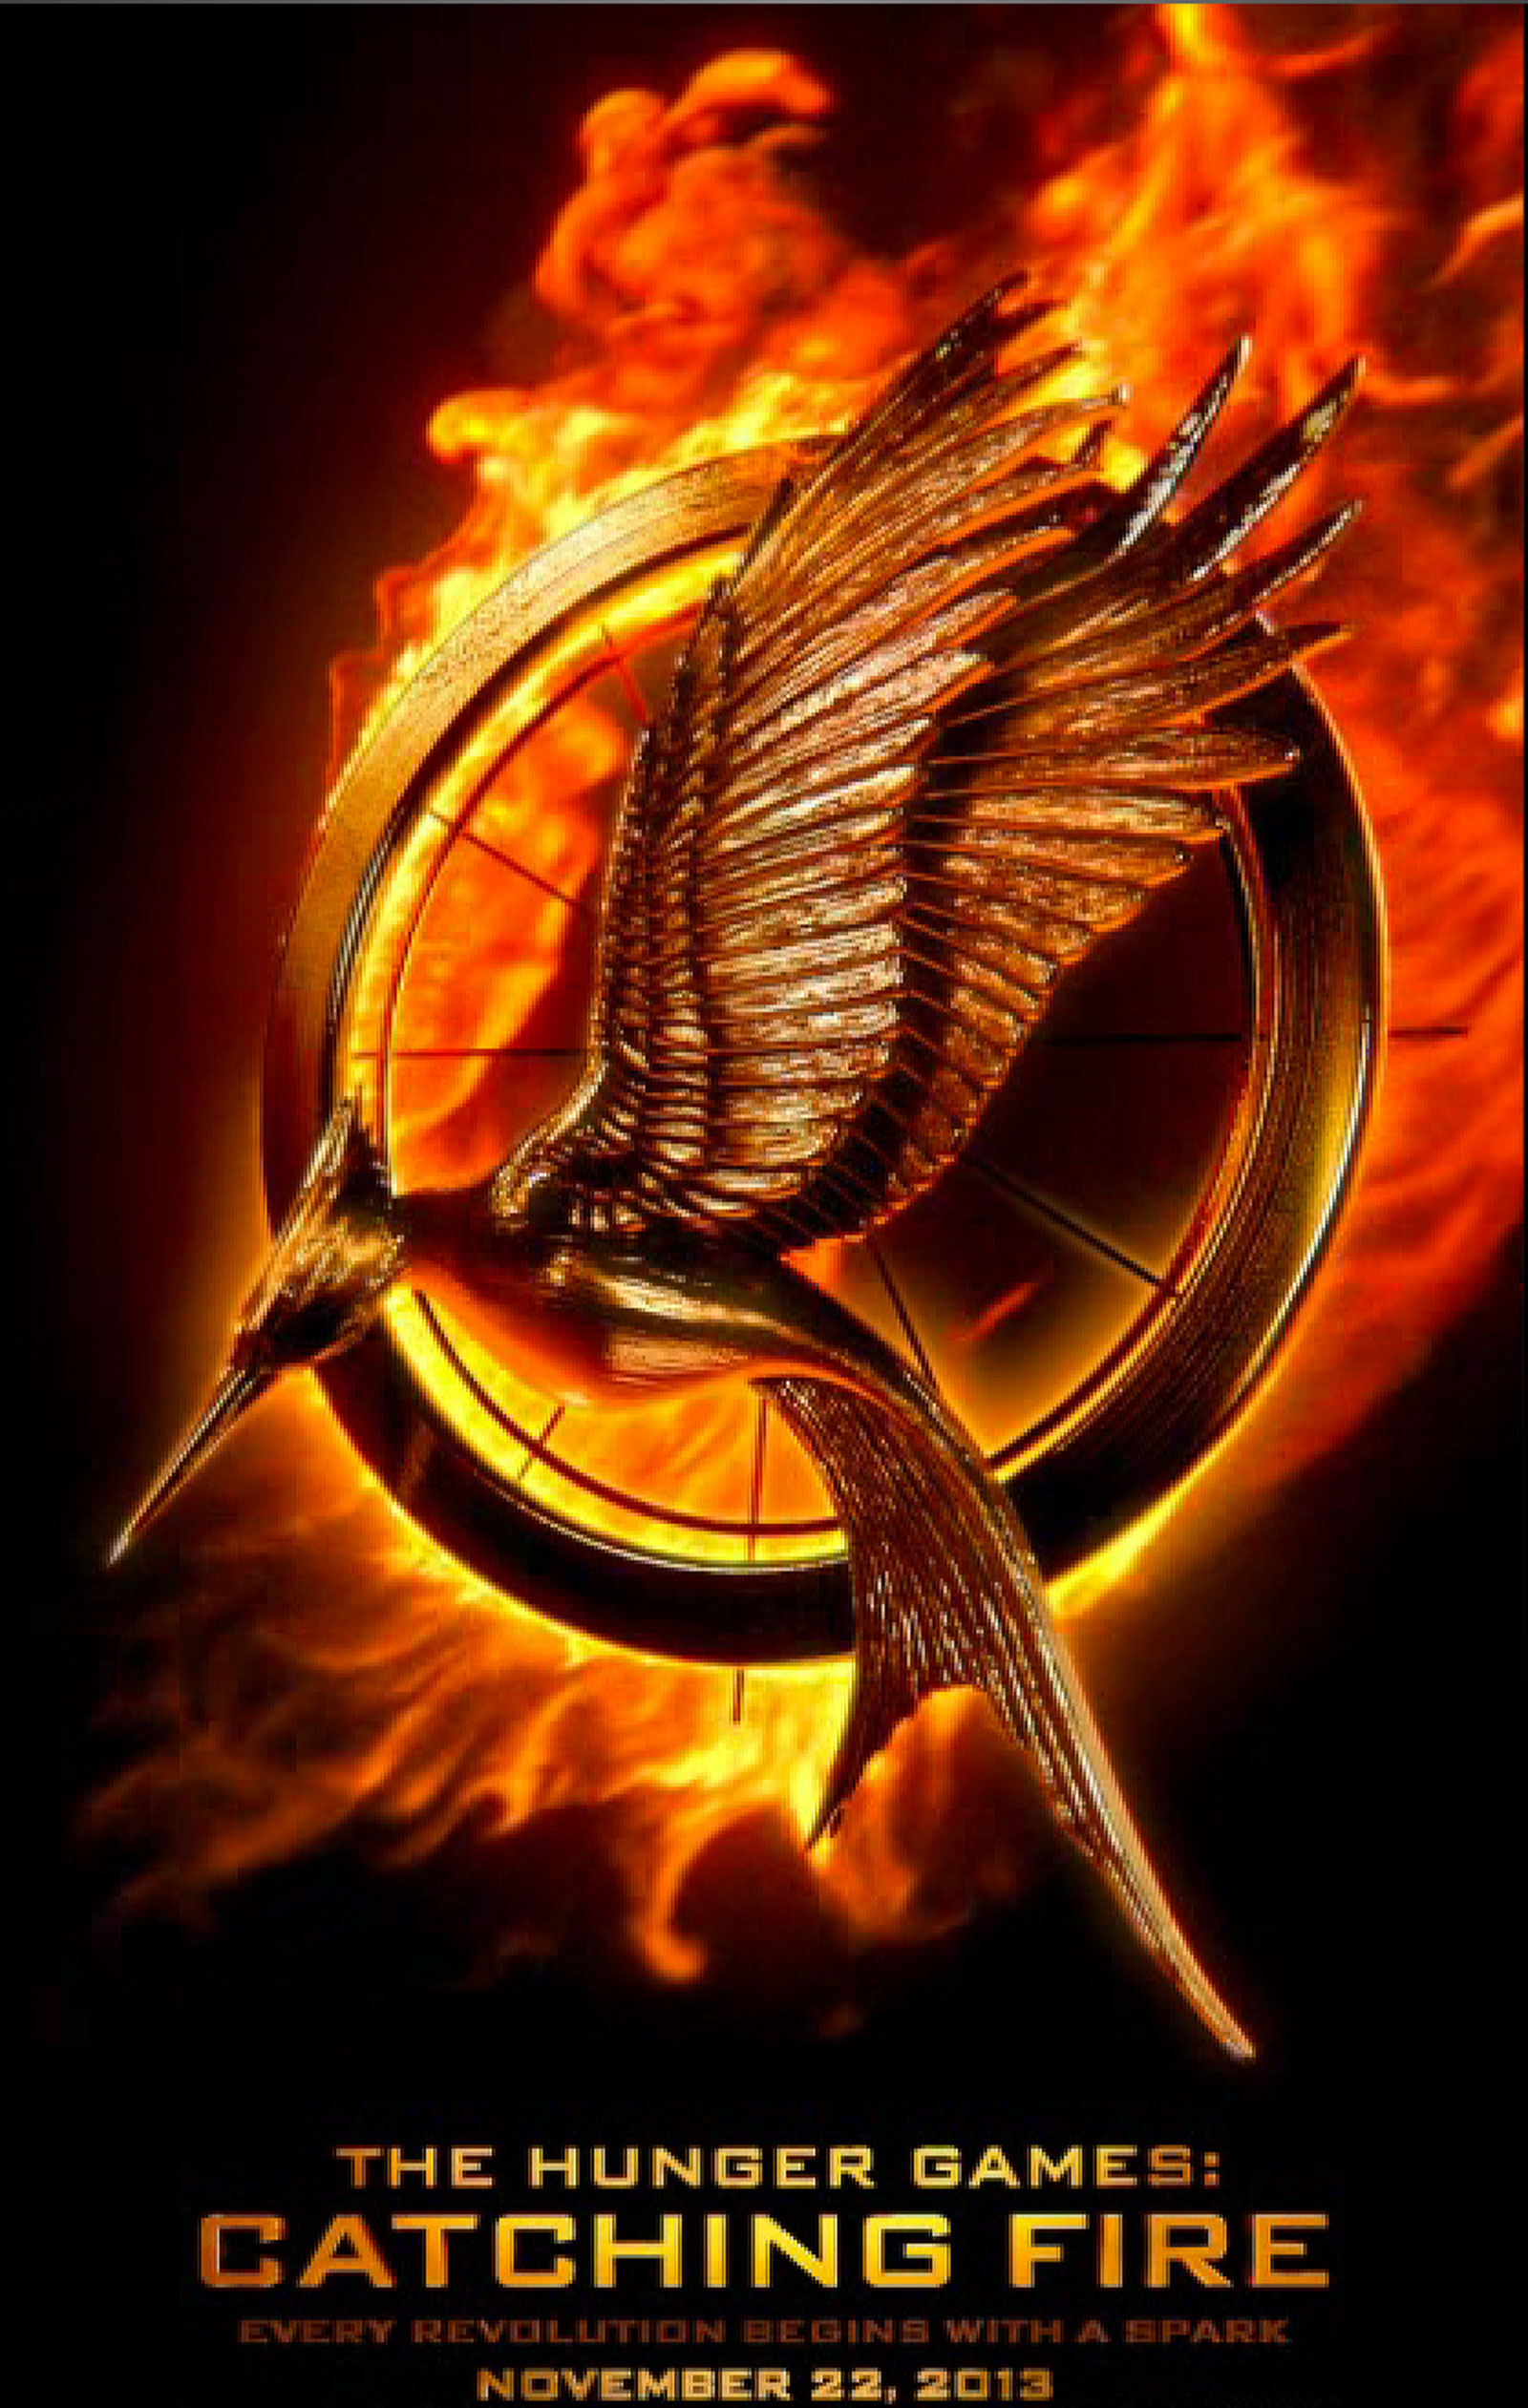 ‘Catching Fire’ Is Already Selling Tickets at Fierce Pace